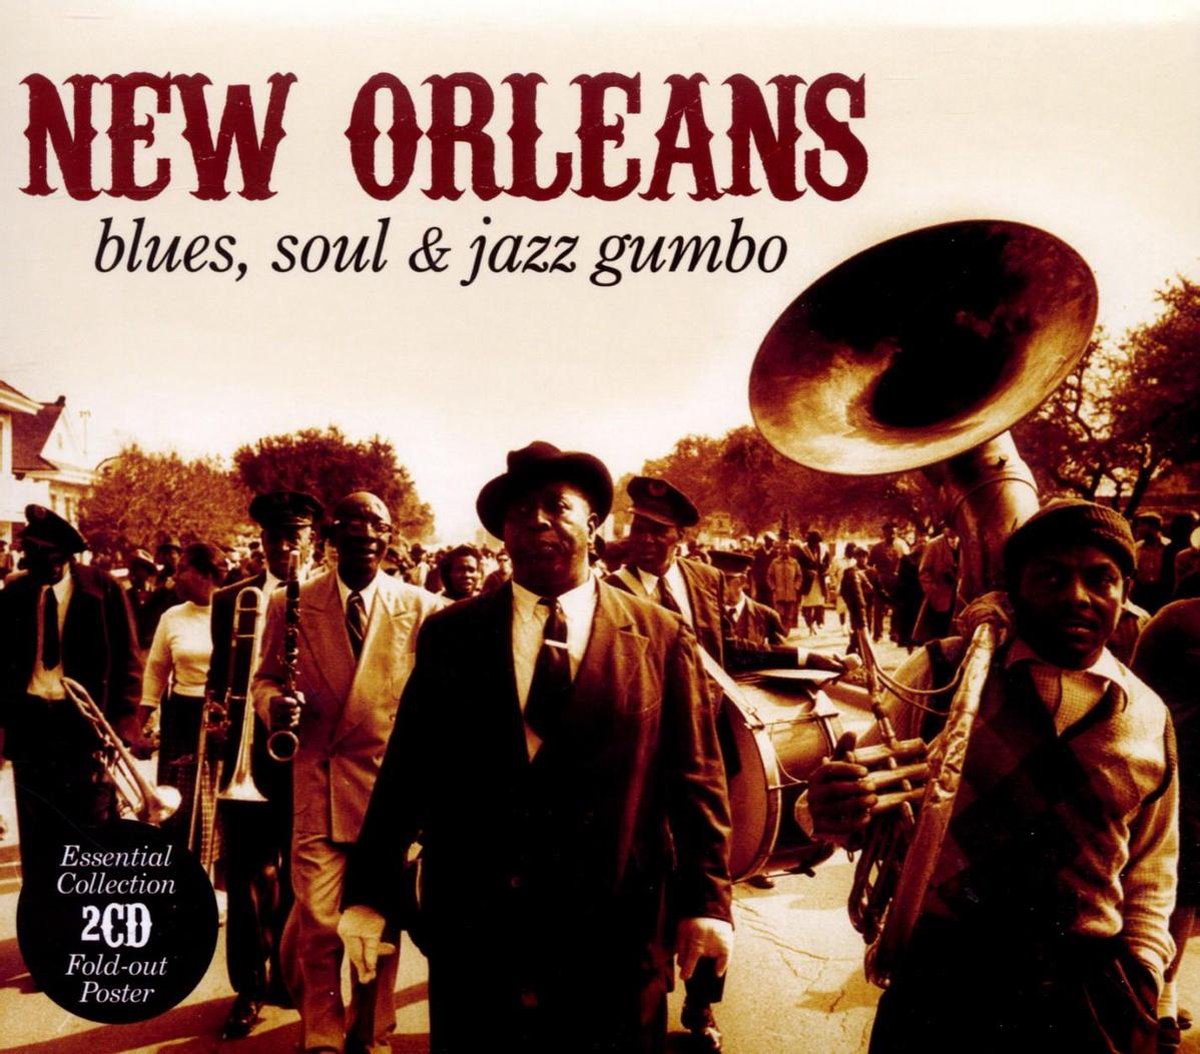 New OrleansBlues, Soul & Jazz Gumbo, various